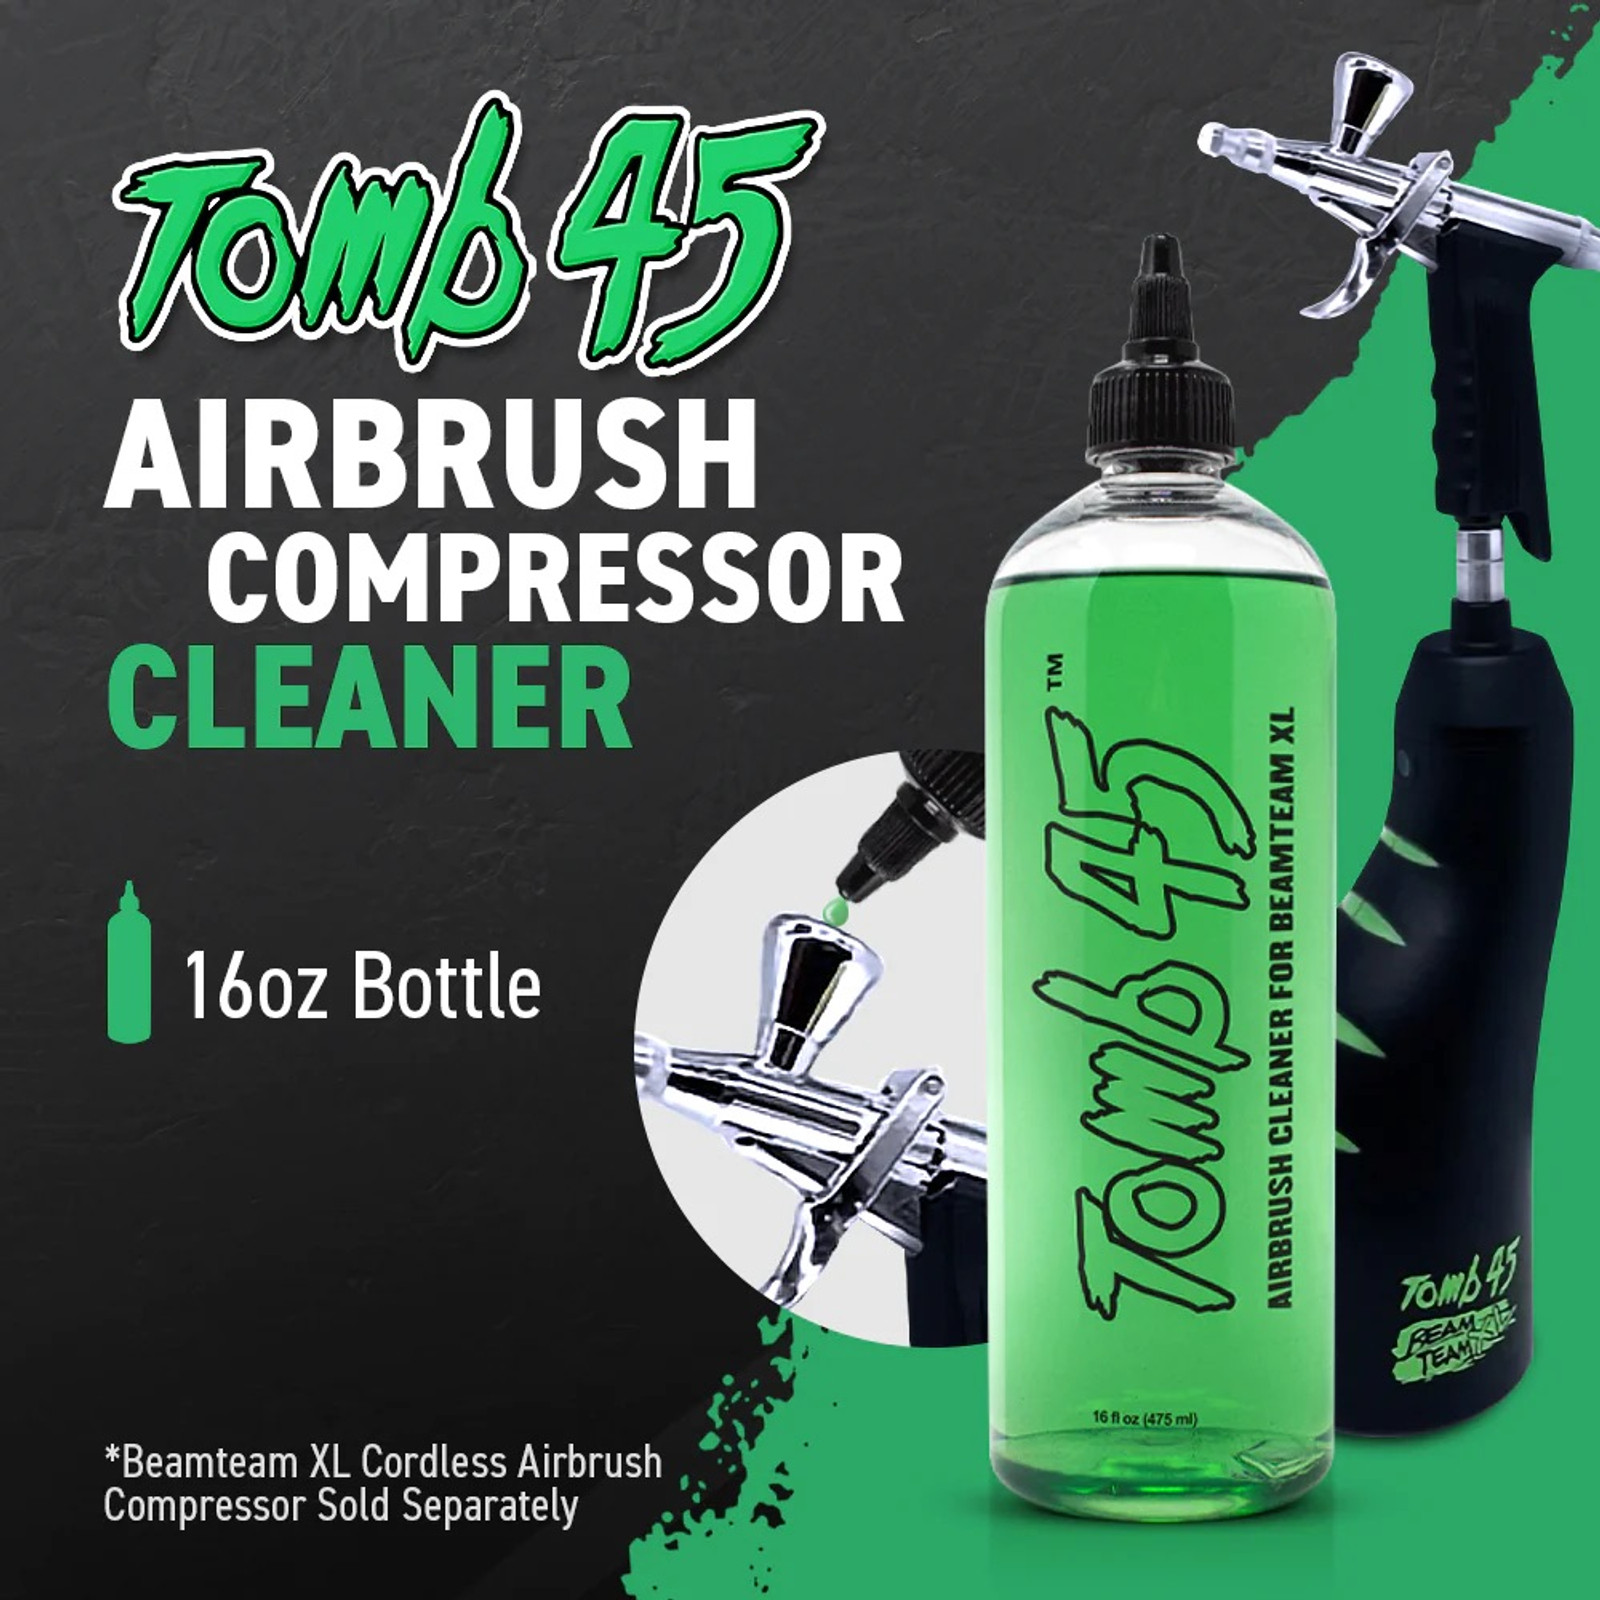 Tomb 45 Airbrush Cleaner for BeamTeam Cordless XL